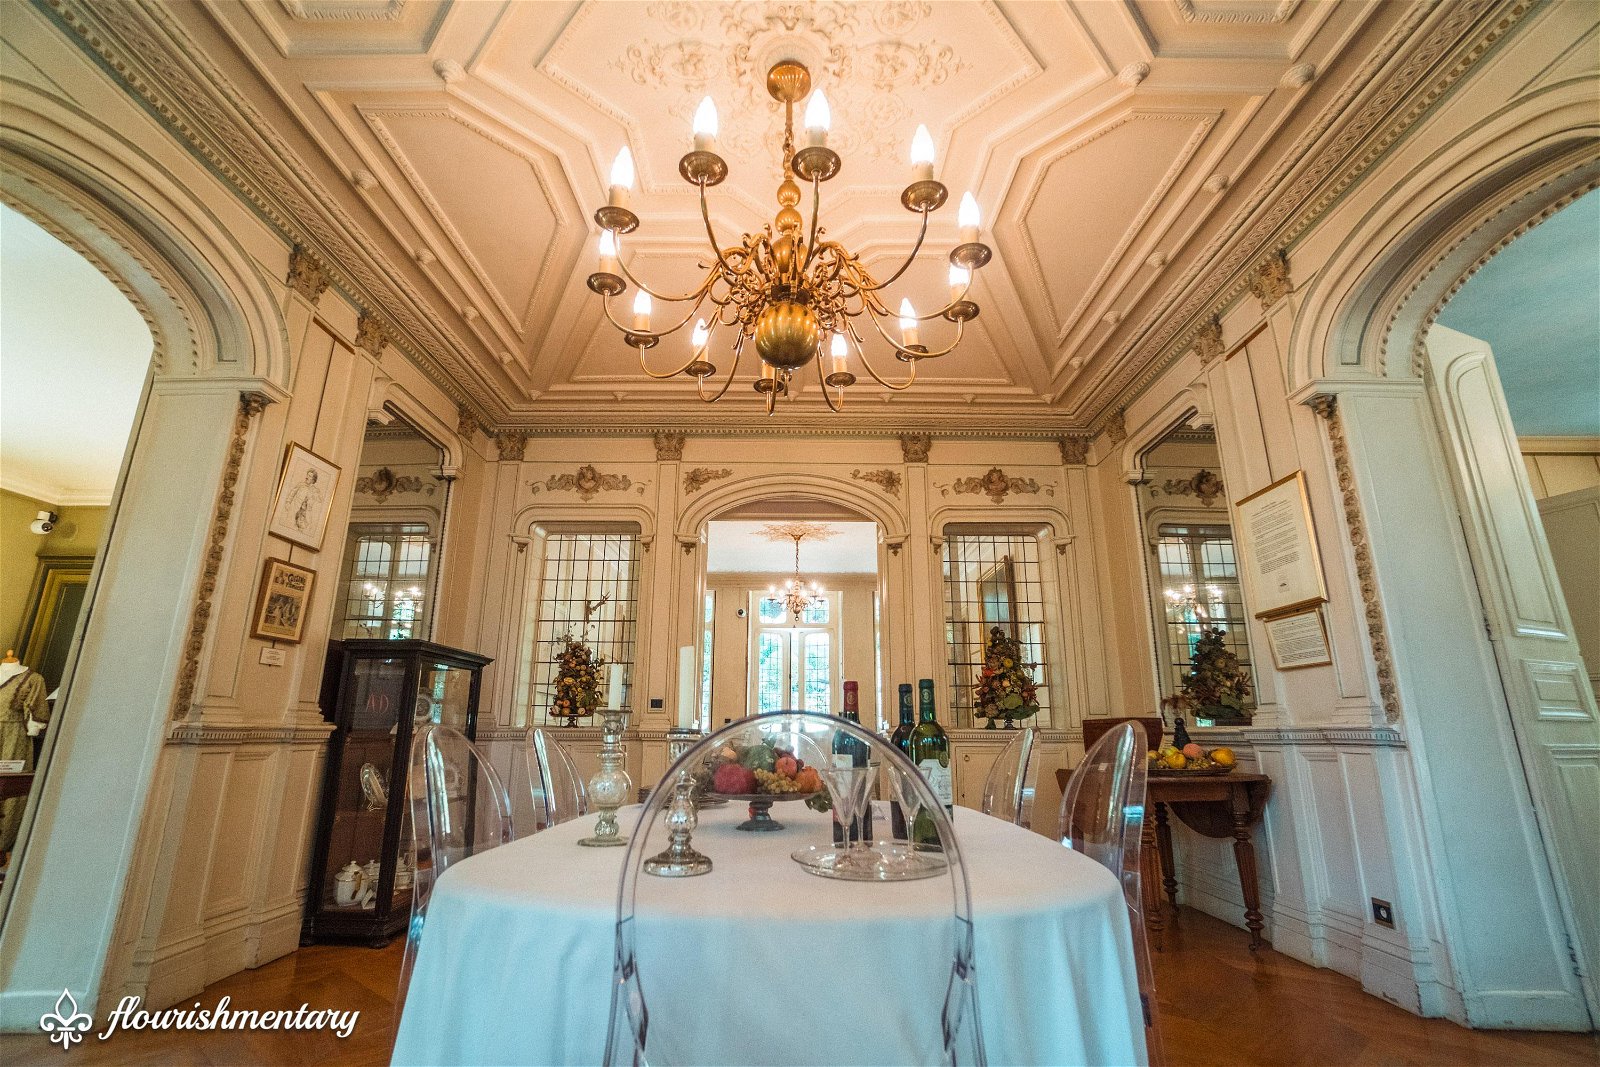 The Dining Room In The Chateau Of Monte Cristo